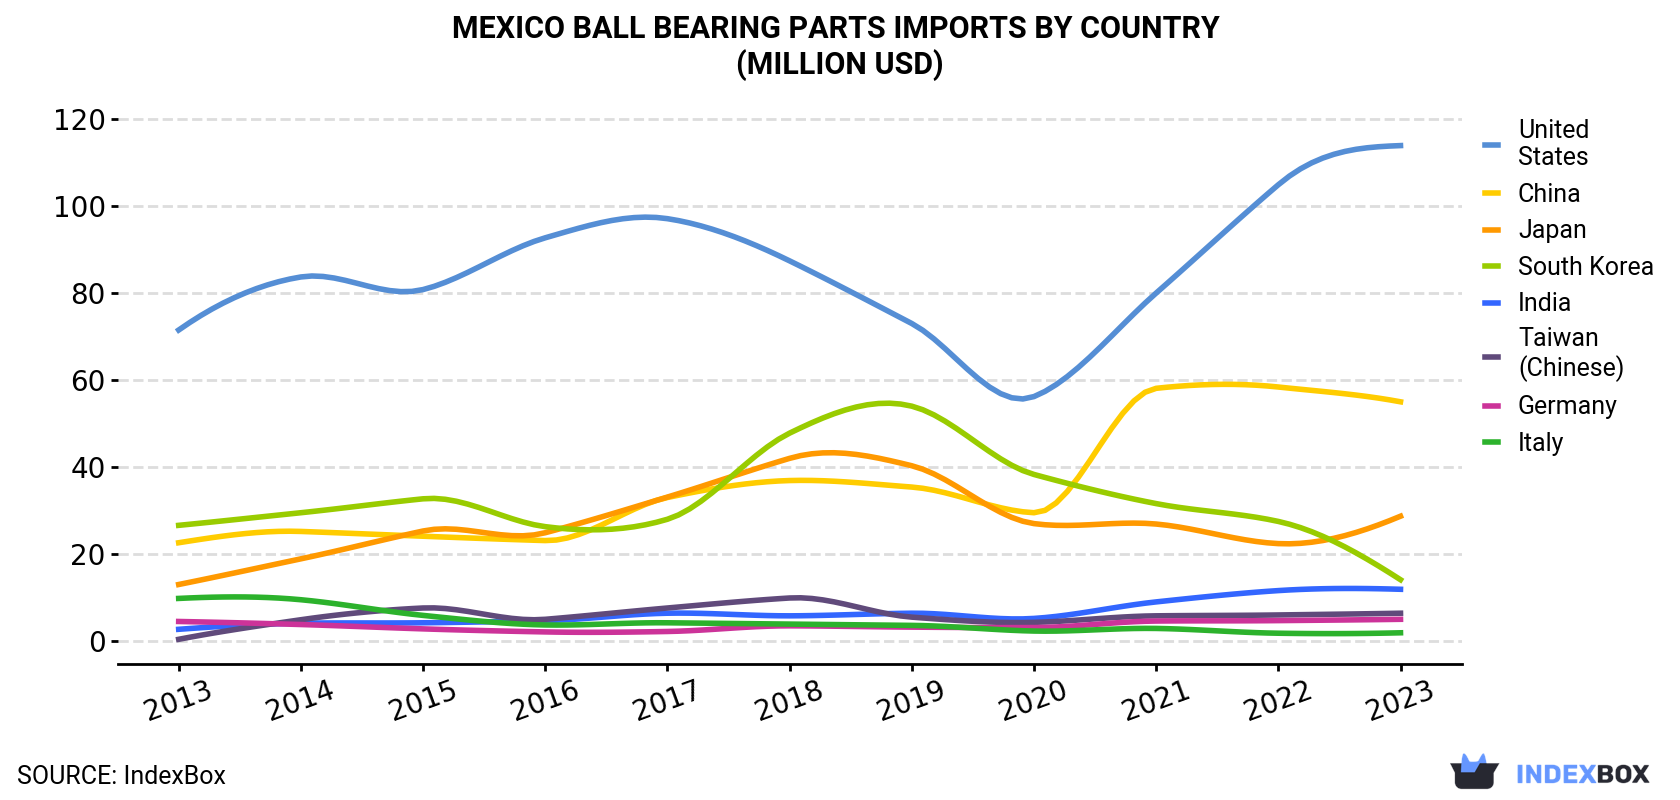 Mexico Ball Bearing Parts Imports By Country (Million USD)